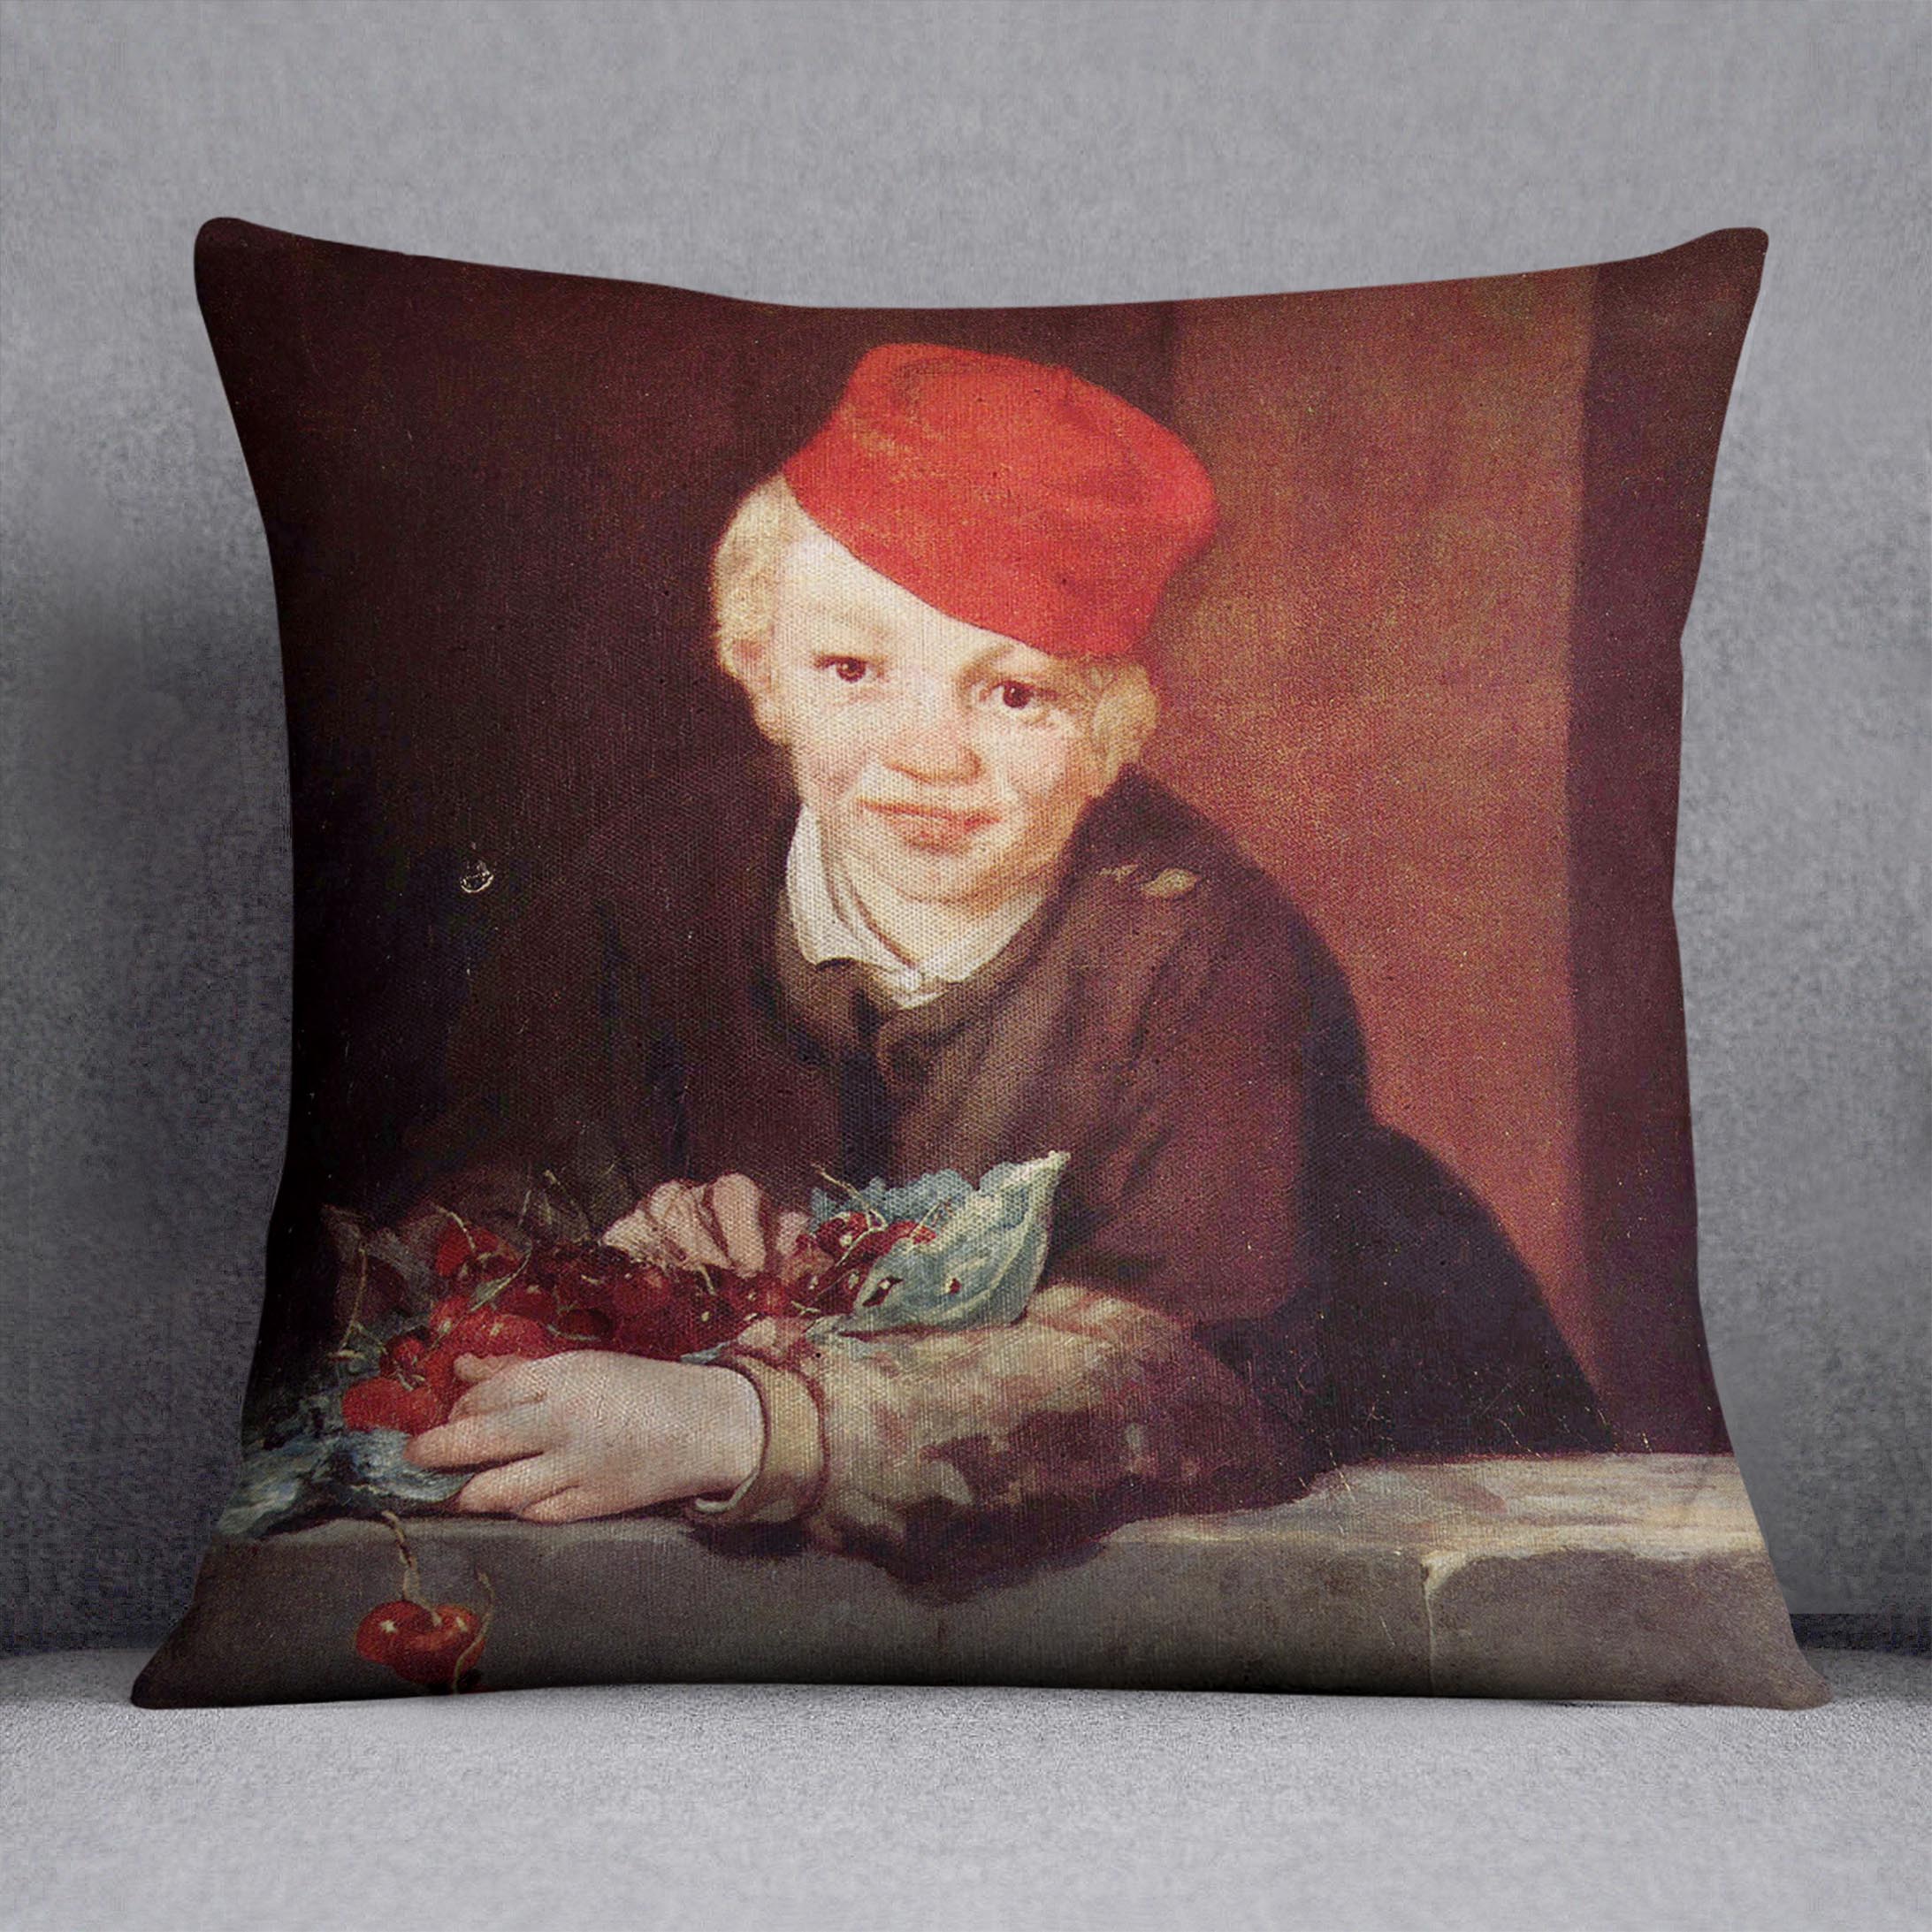 Boy with the cherries by Manet Cushion